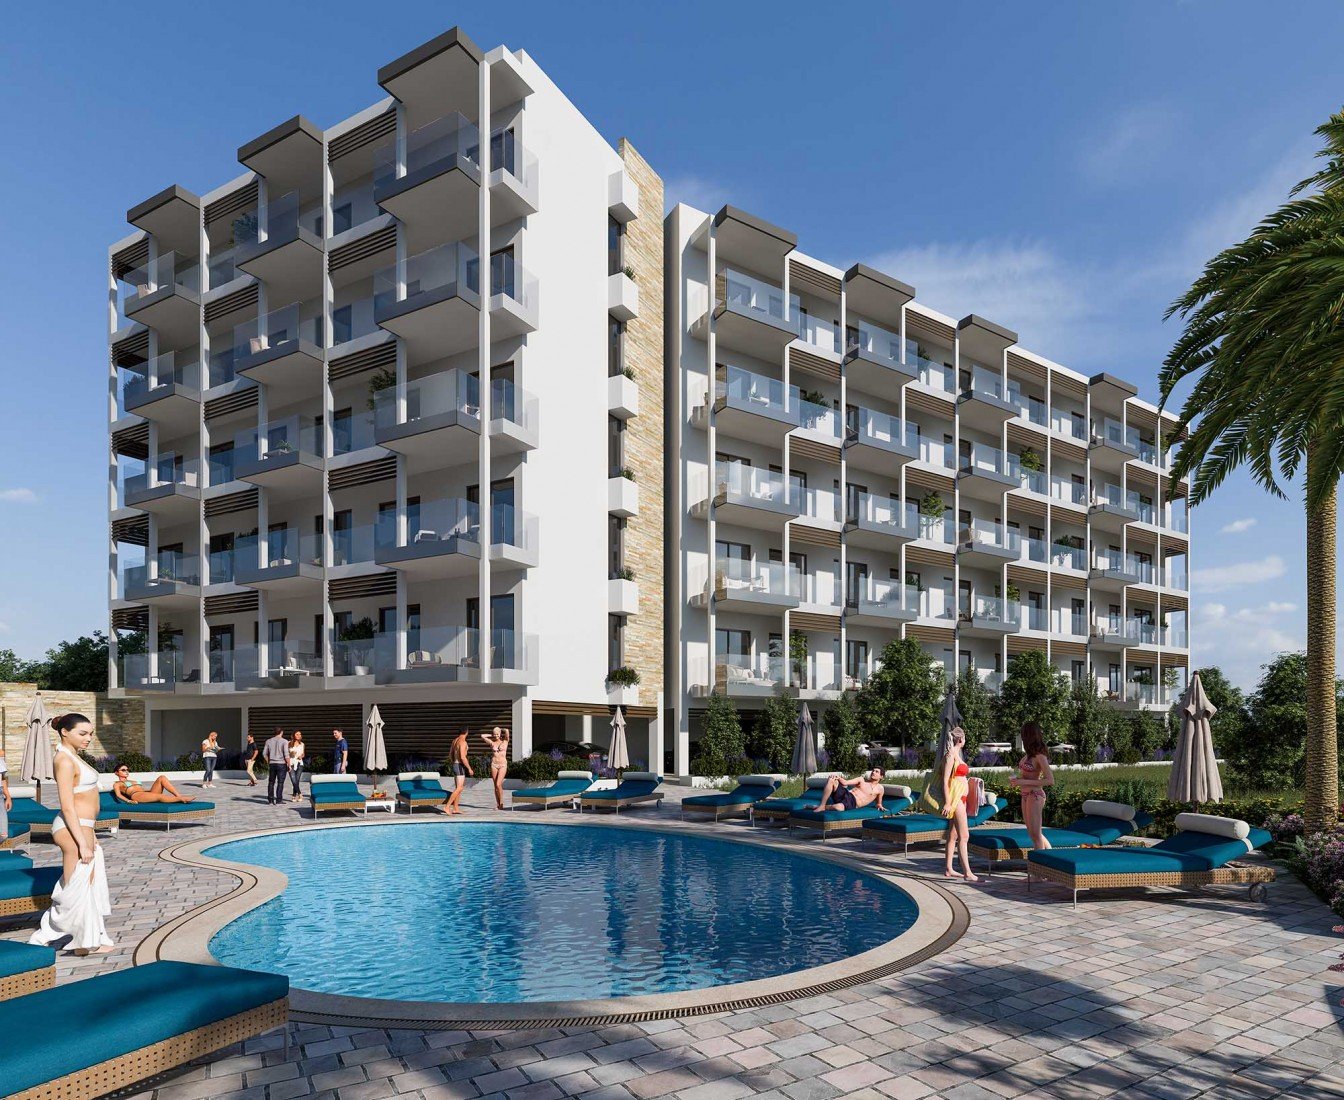 Apartment for sale in Limassol, Cyprus 1832030689